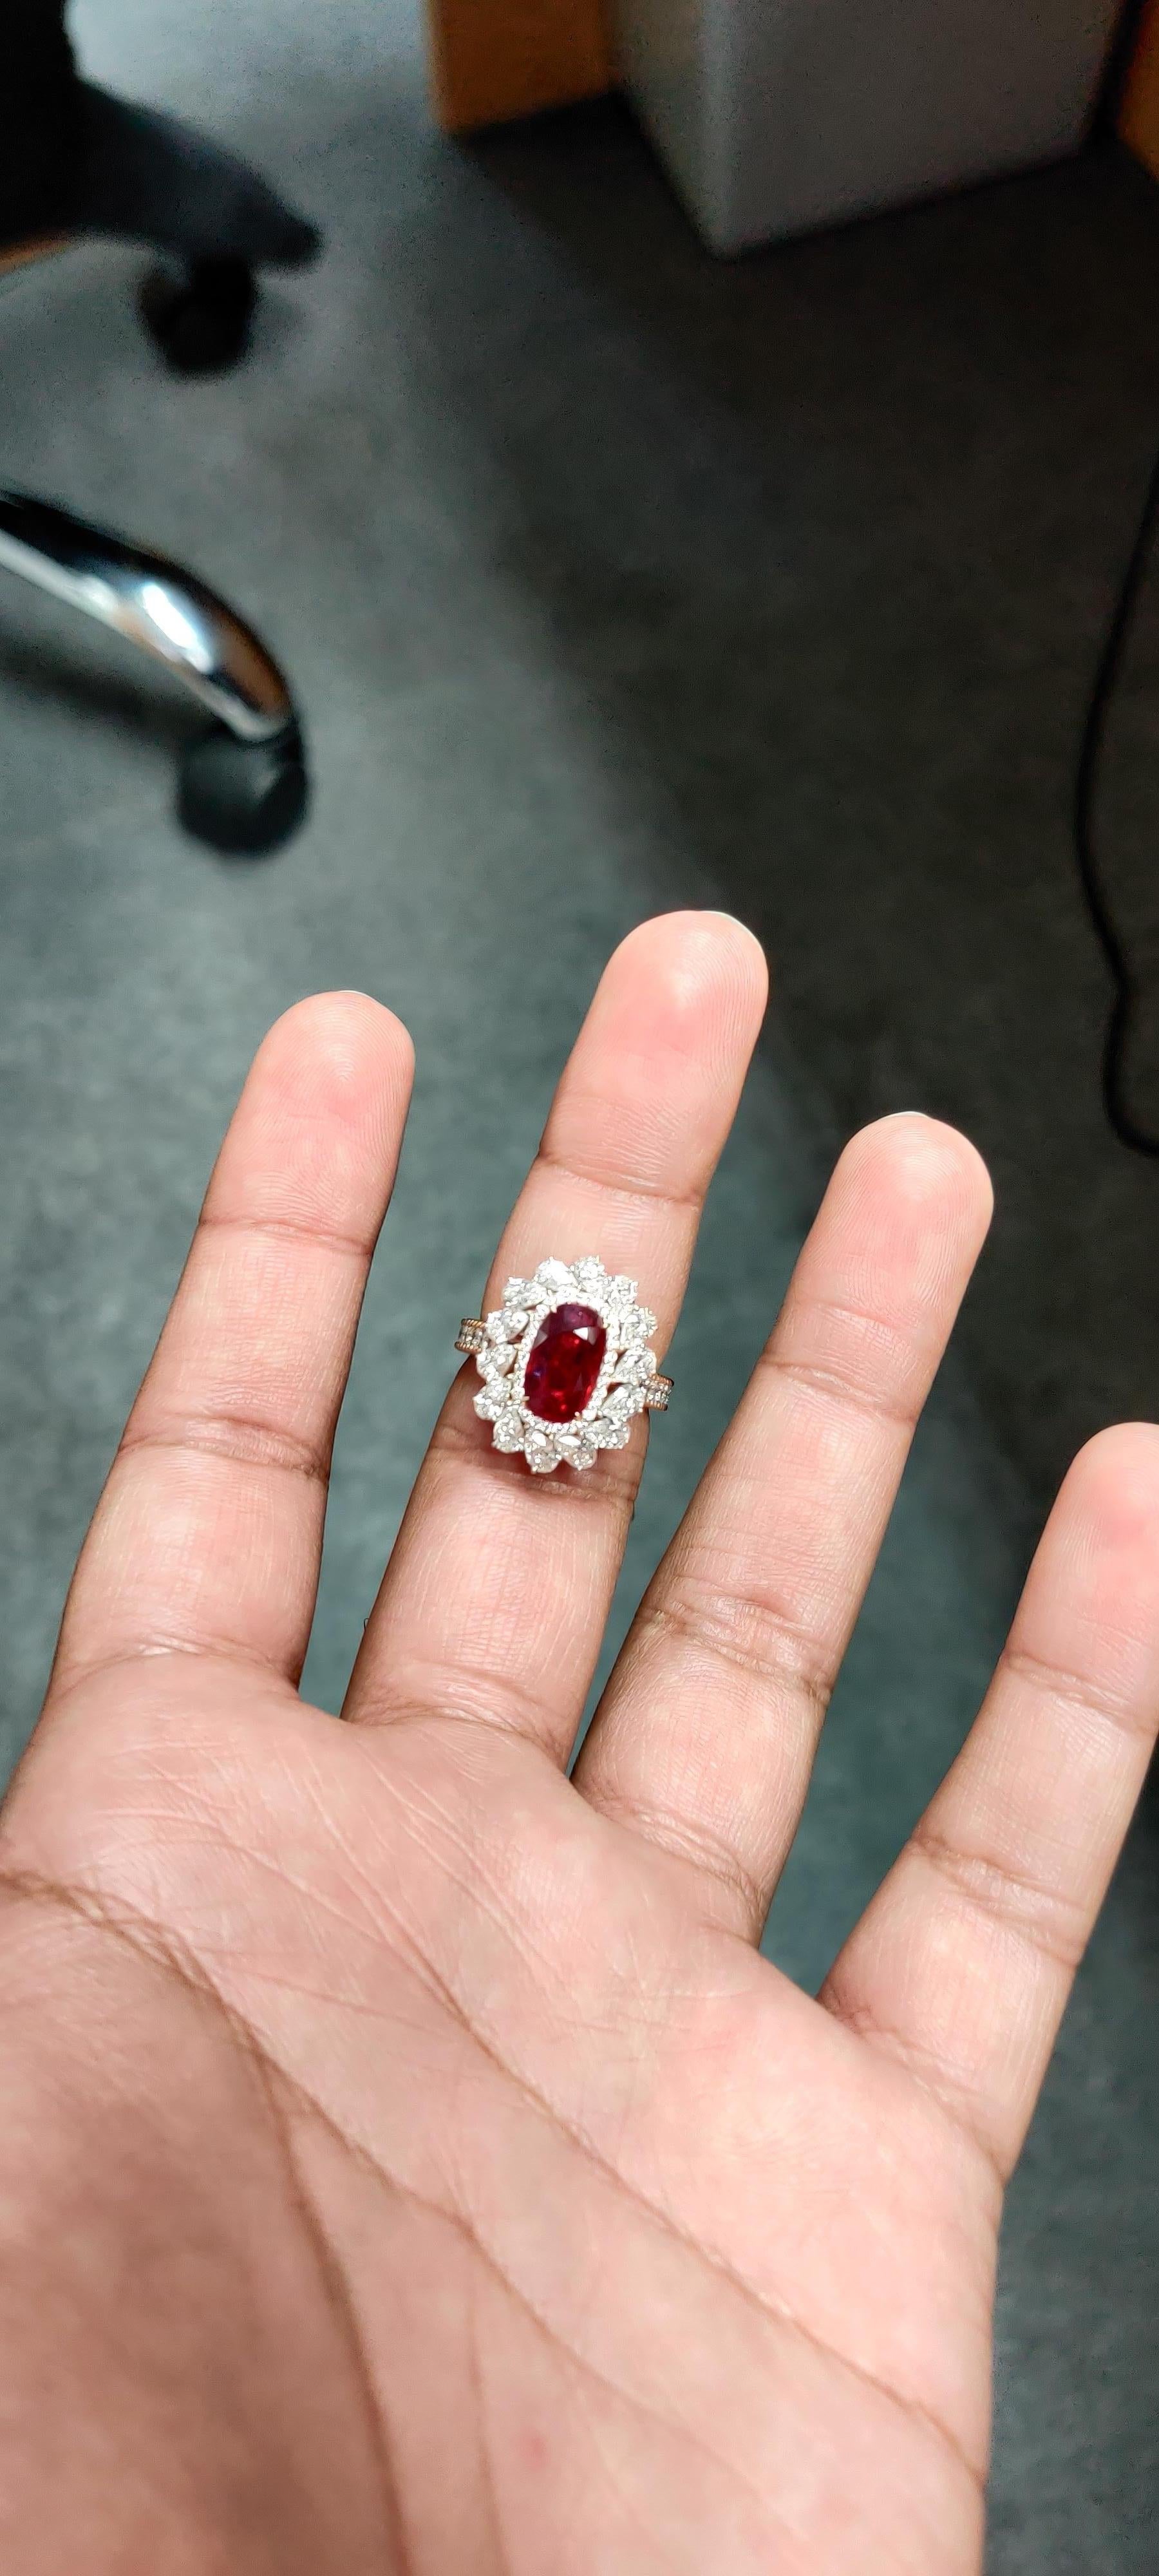 Oval Cut 3.01 Carat No-Heat Mozambique Ruby Diamond Ring For Sale